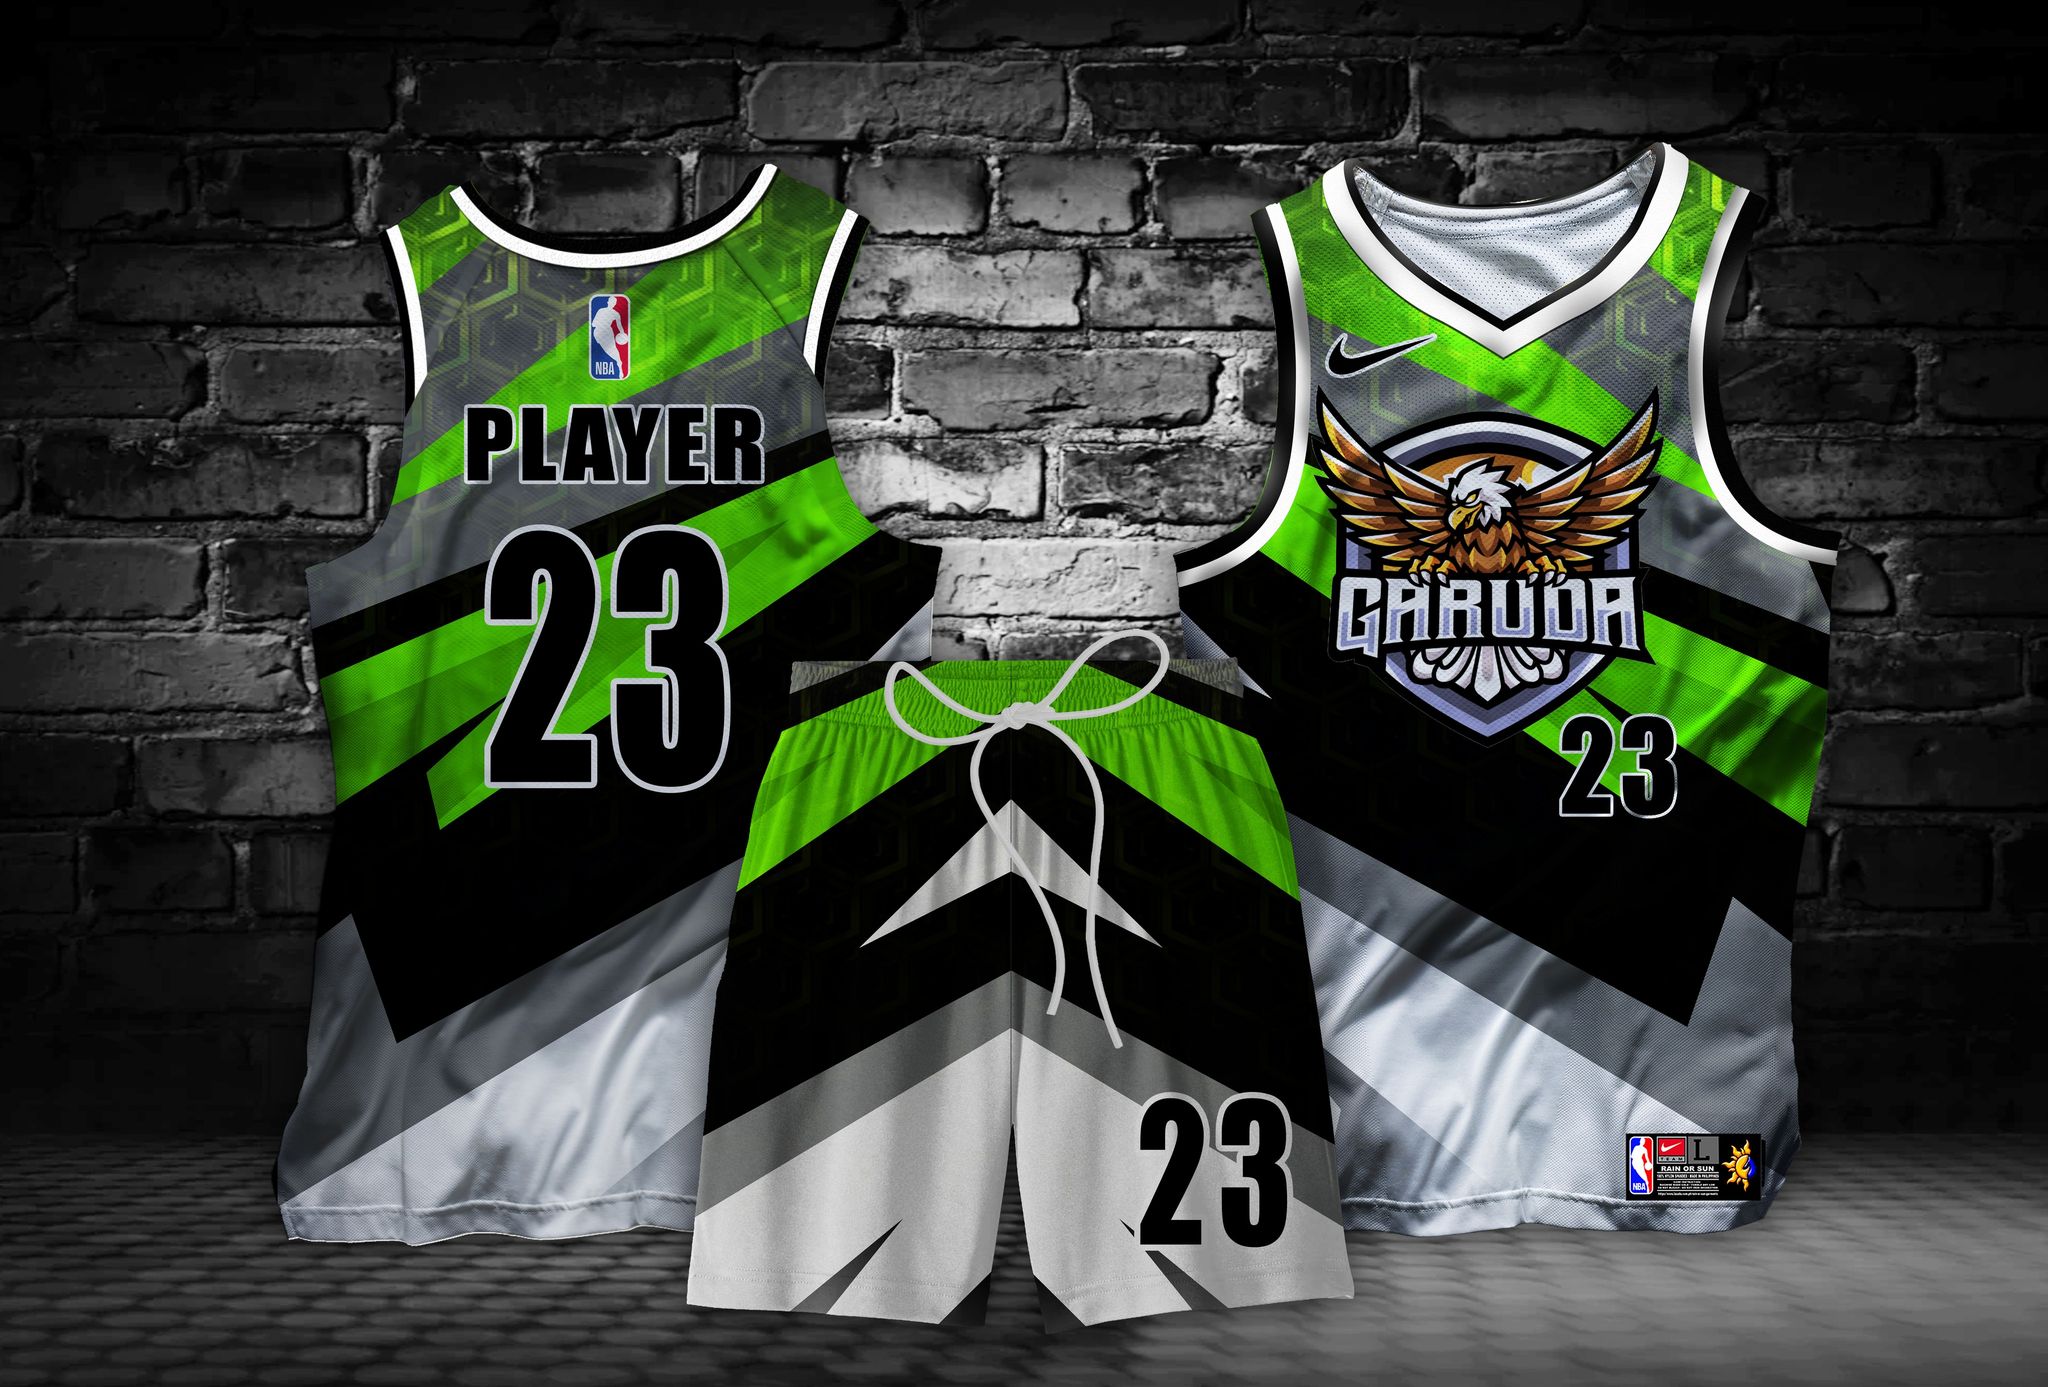 GARUDA 01 PLAYER GREEN CUSTOMIZED JERSEY TERNO WITH FREE NAME & NUMBER FULL  SUBLIMATION HIGH QUALITY FABRICS